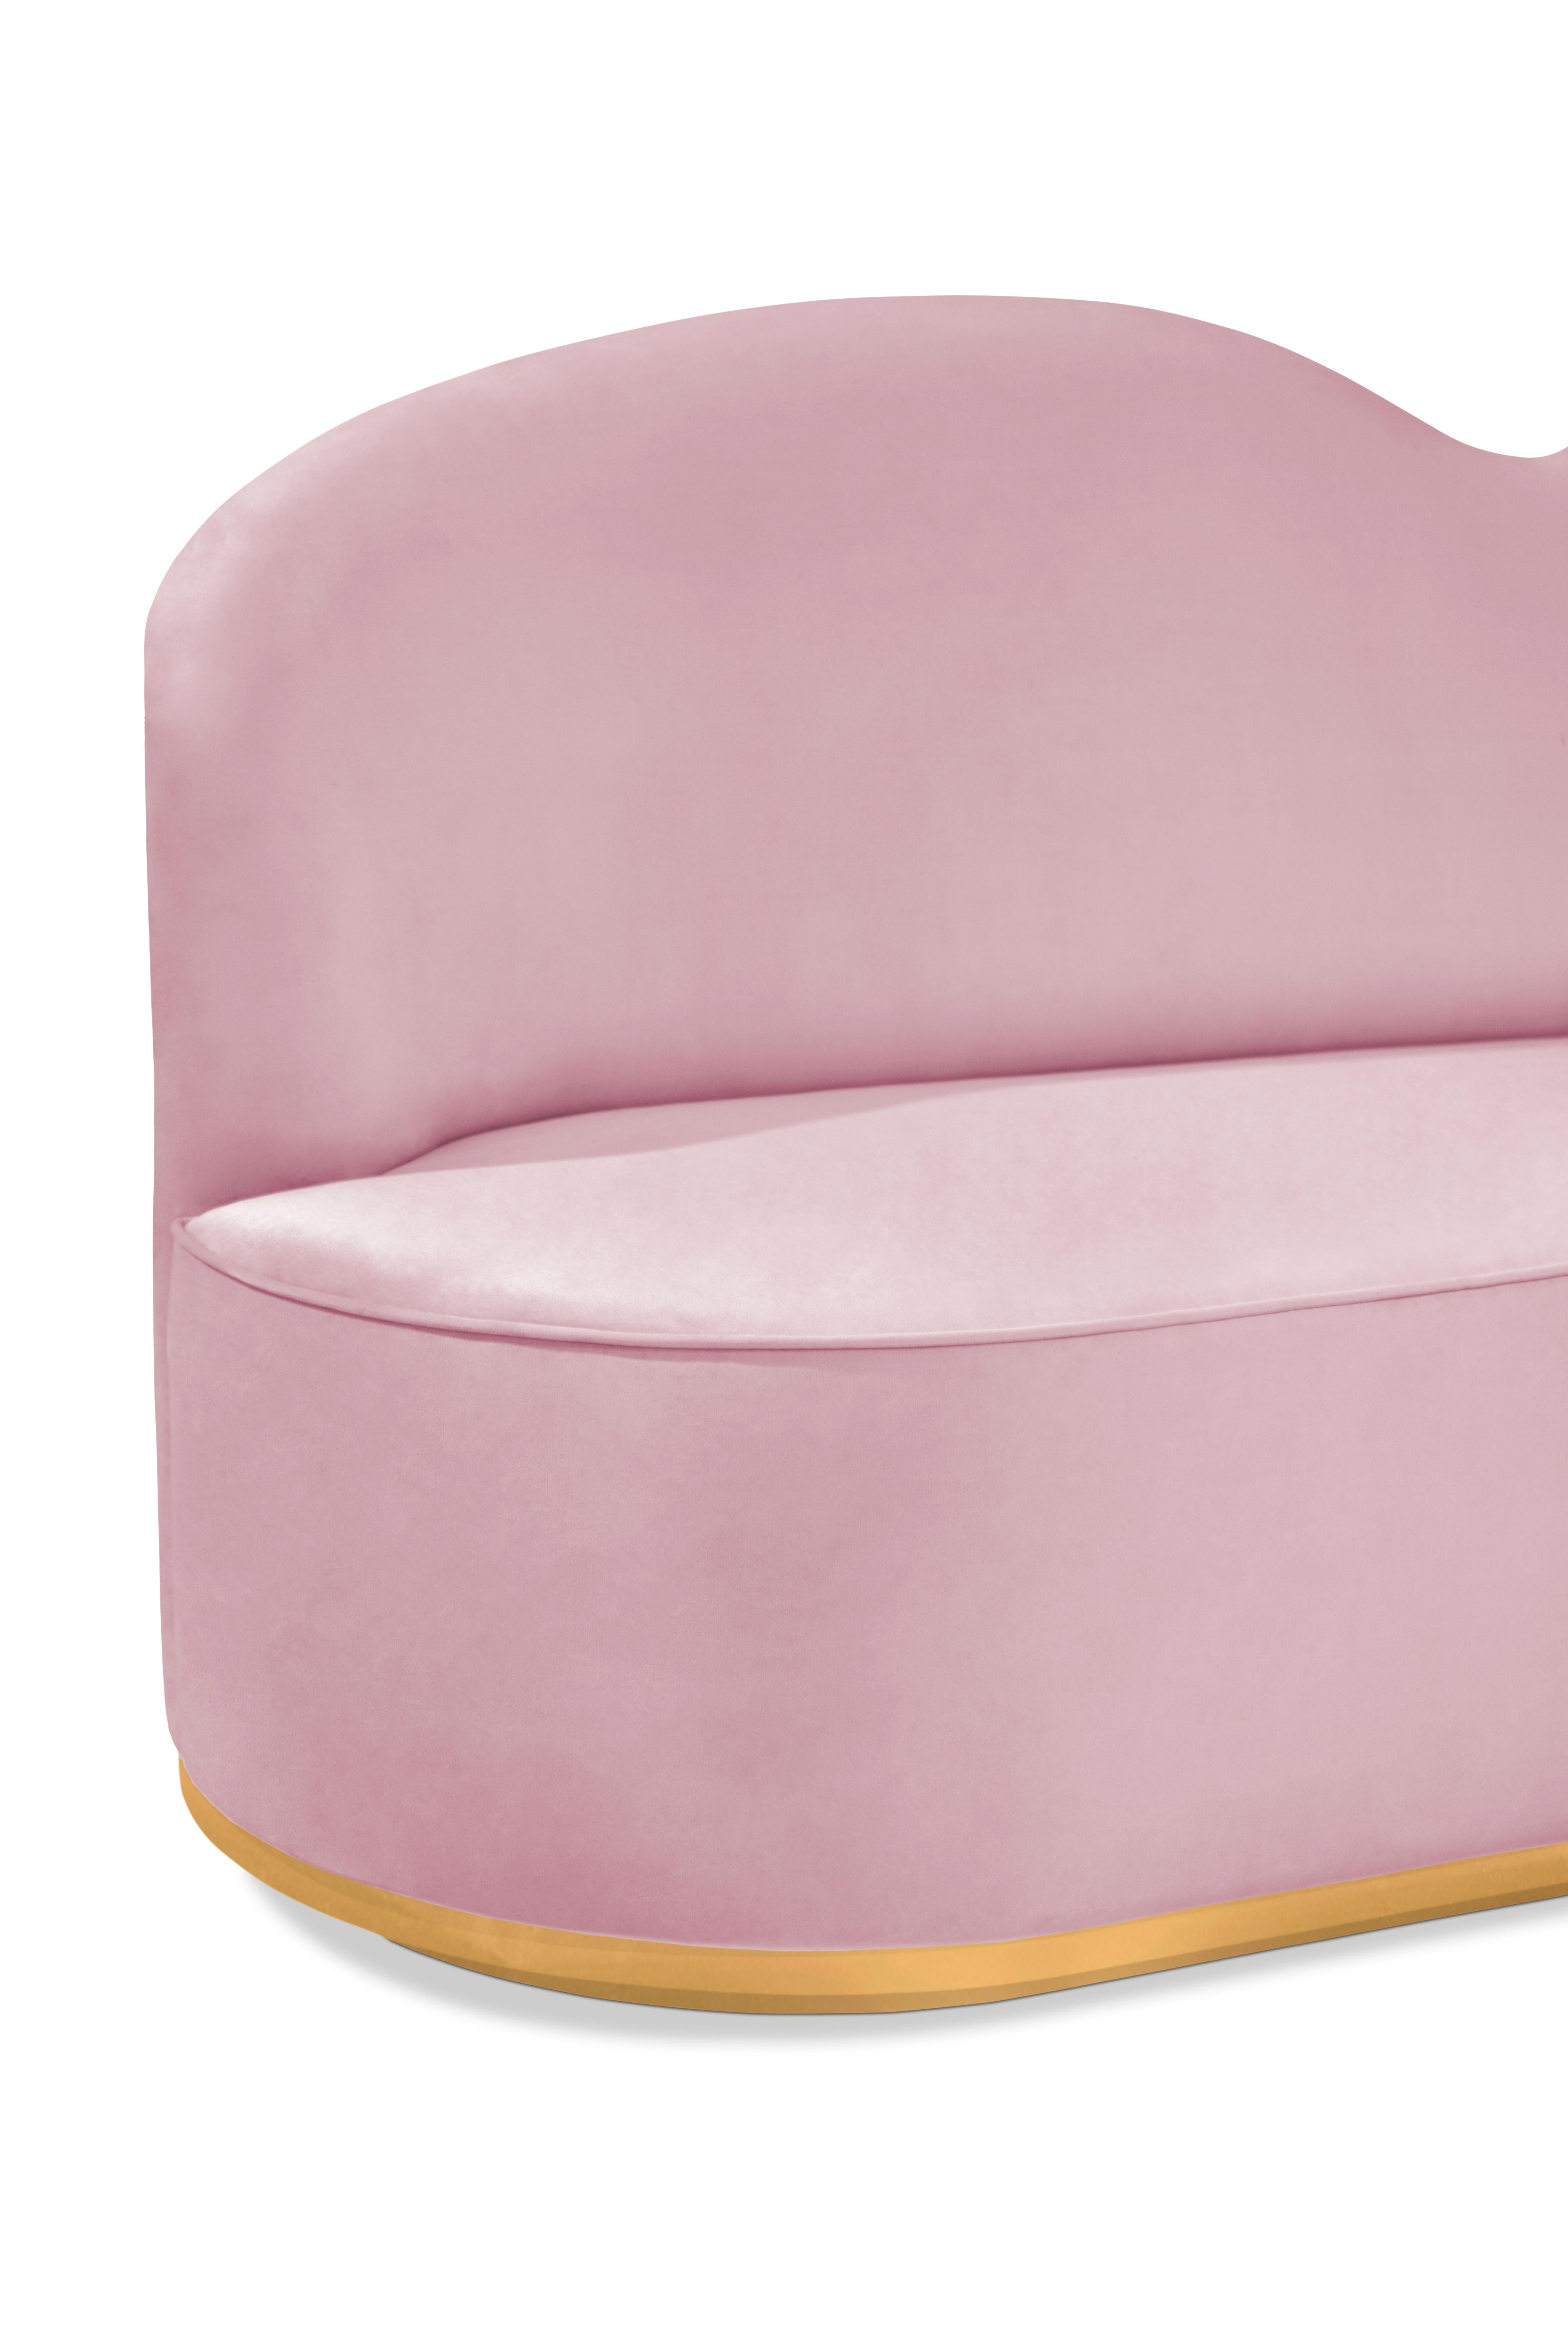 Cloud Kids Sofa in Wood and Velvet by Circu Magical Furniture For Sale 3